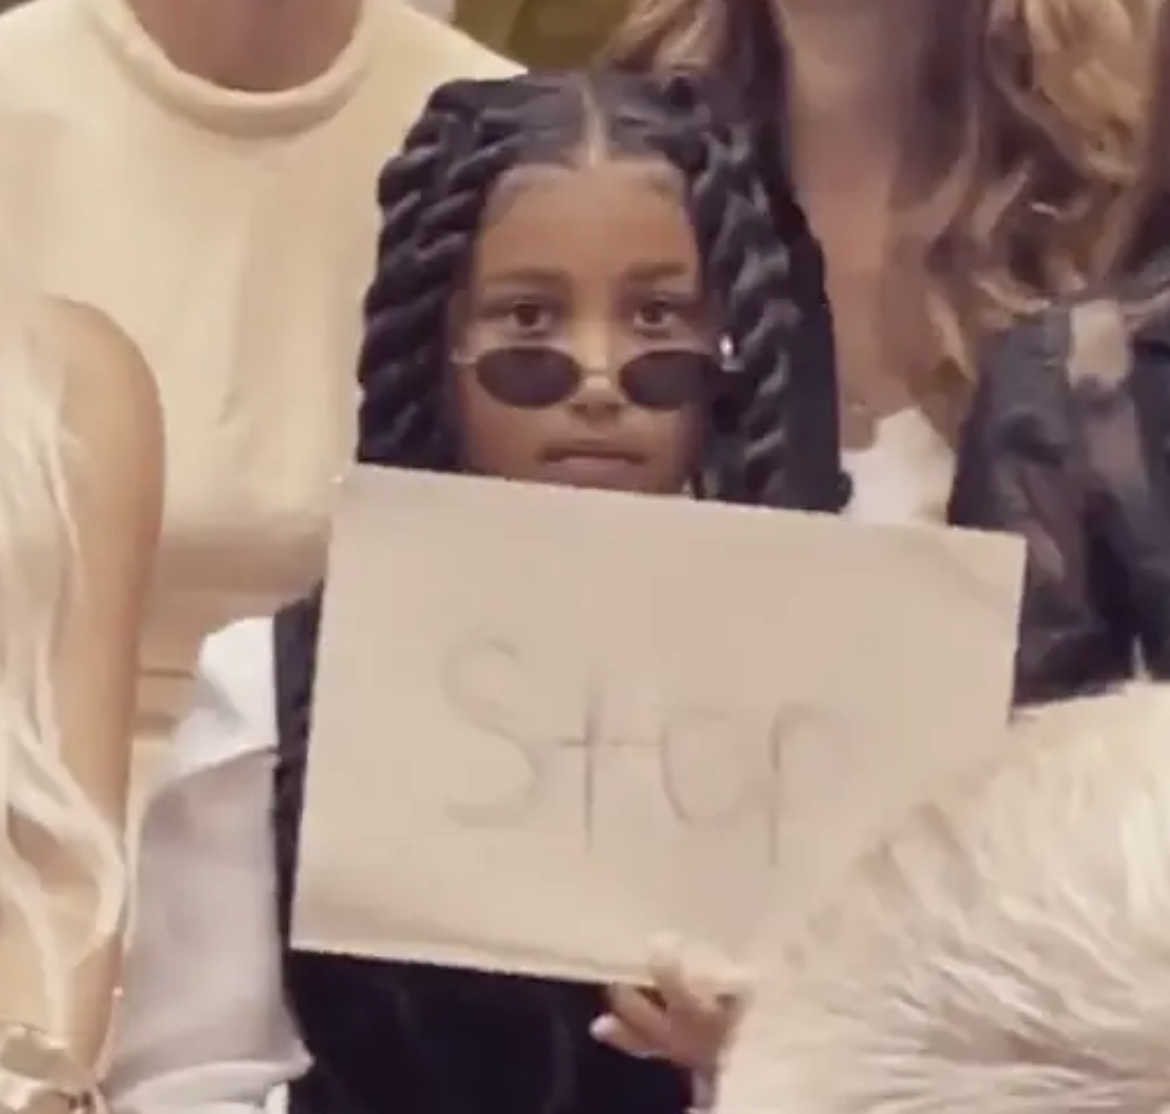 North holding a &quot;Stop&quot; sign